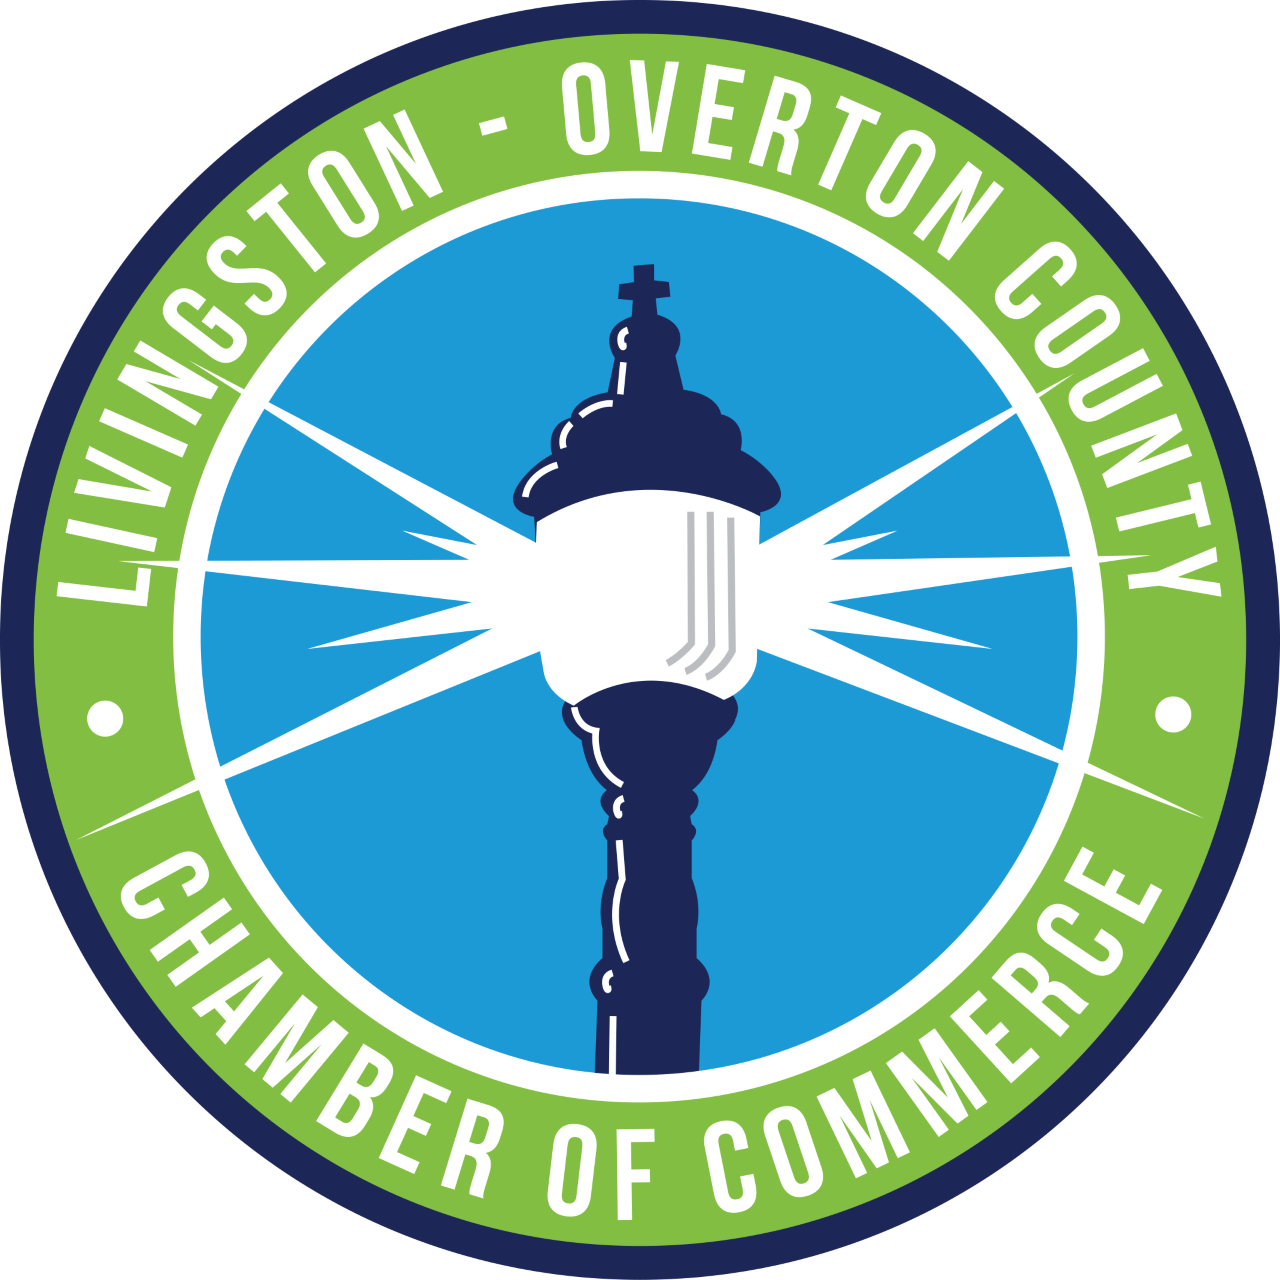 Local First, Livingston Overton County logo